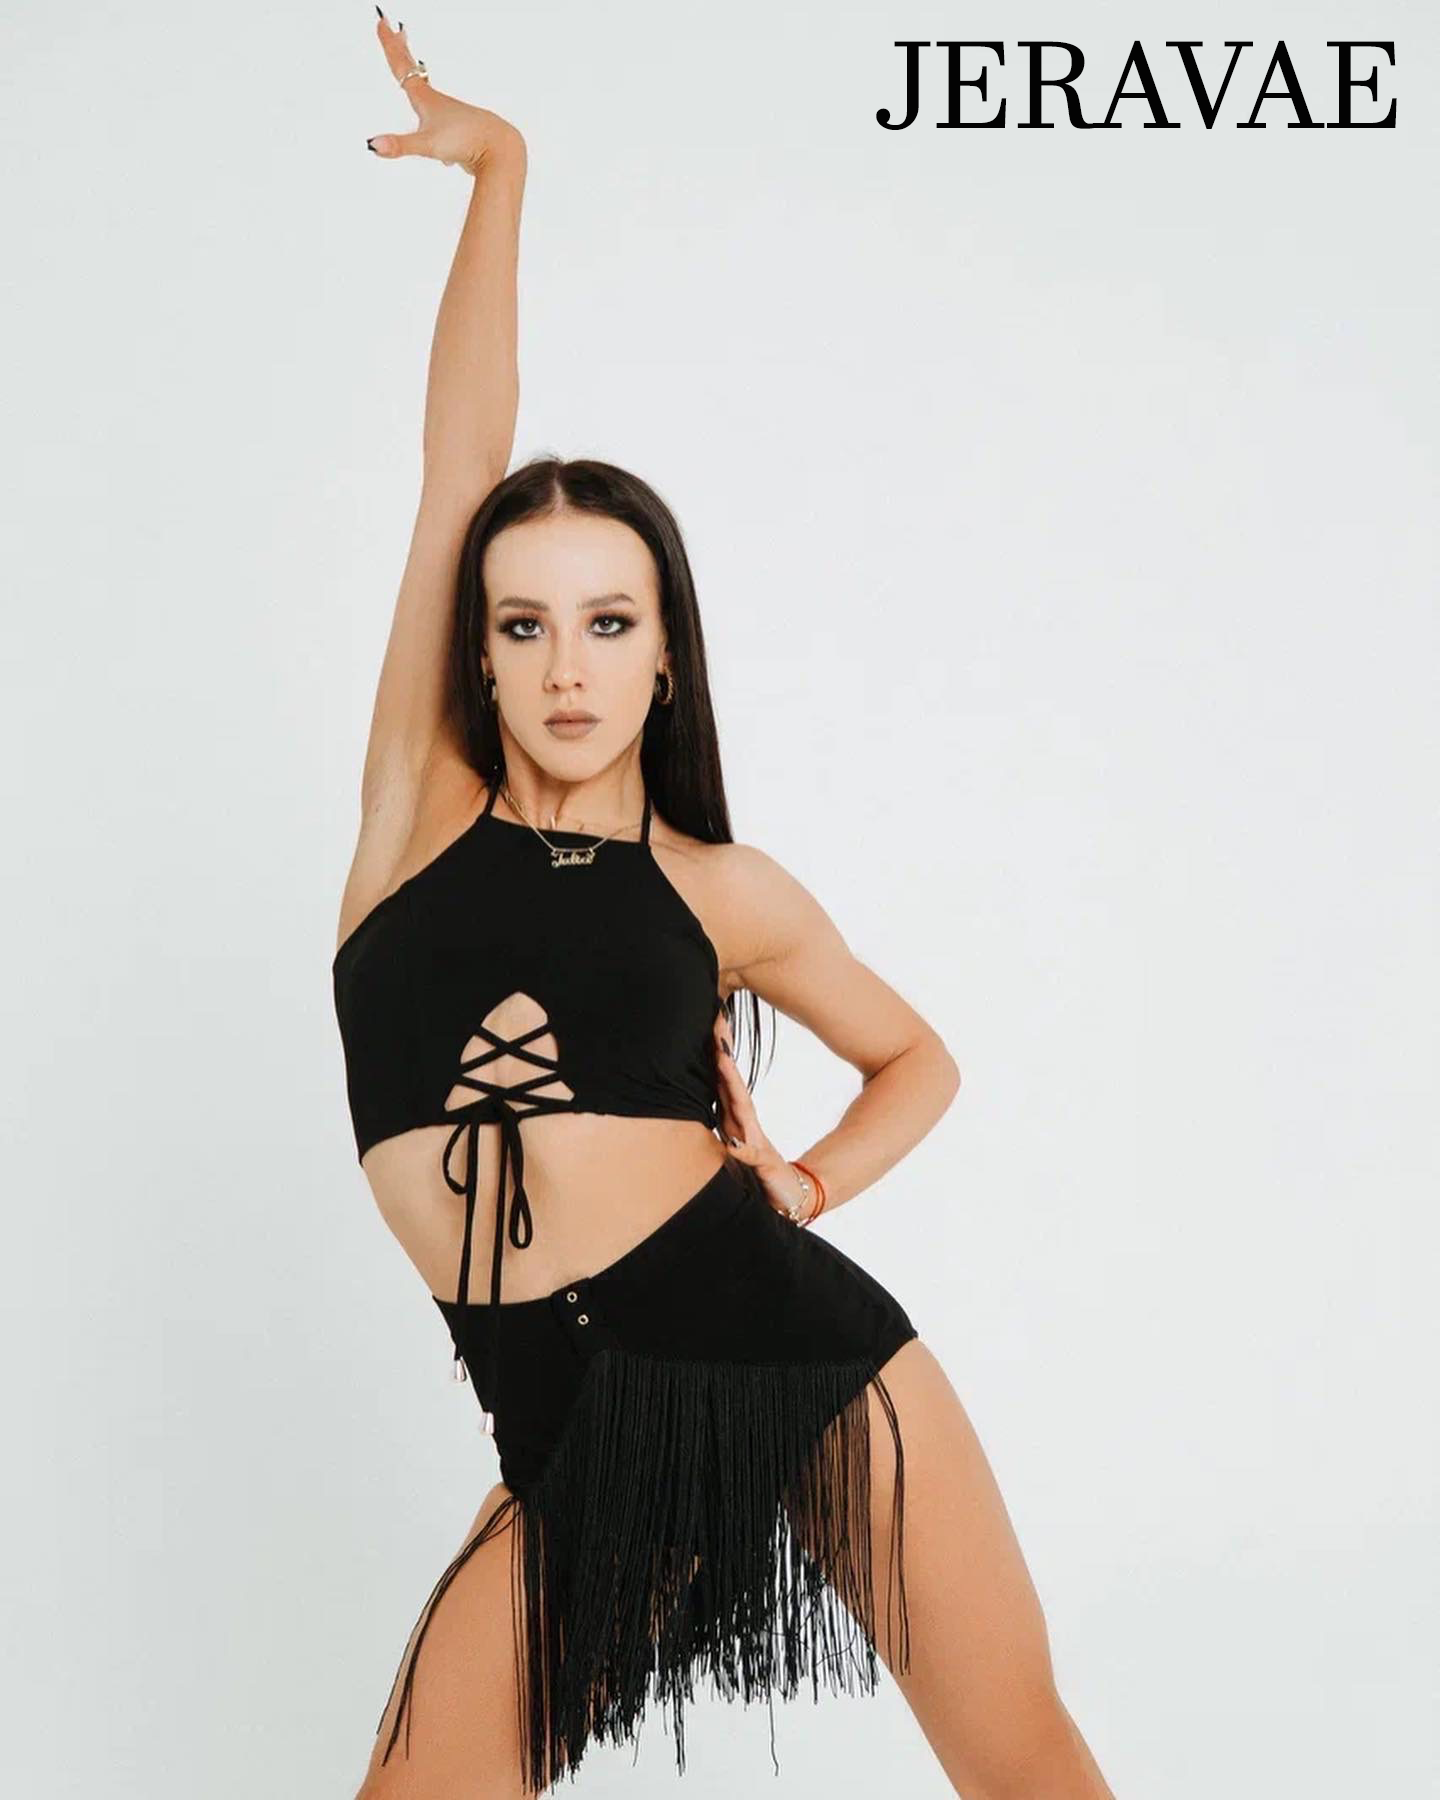 Sirius Practice Dance Wear Sleeveless Halter Latin Crop Top with Cross Strap Cutout Detail in Front Available in 3 Colors PRA 852 In Stock